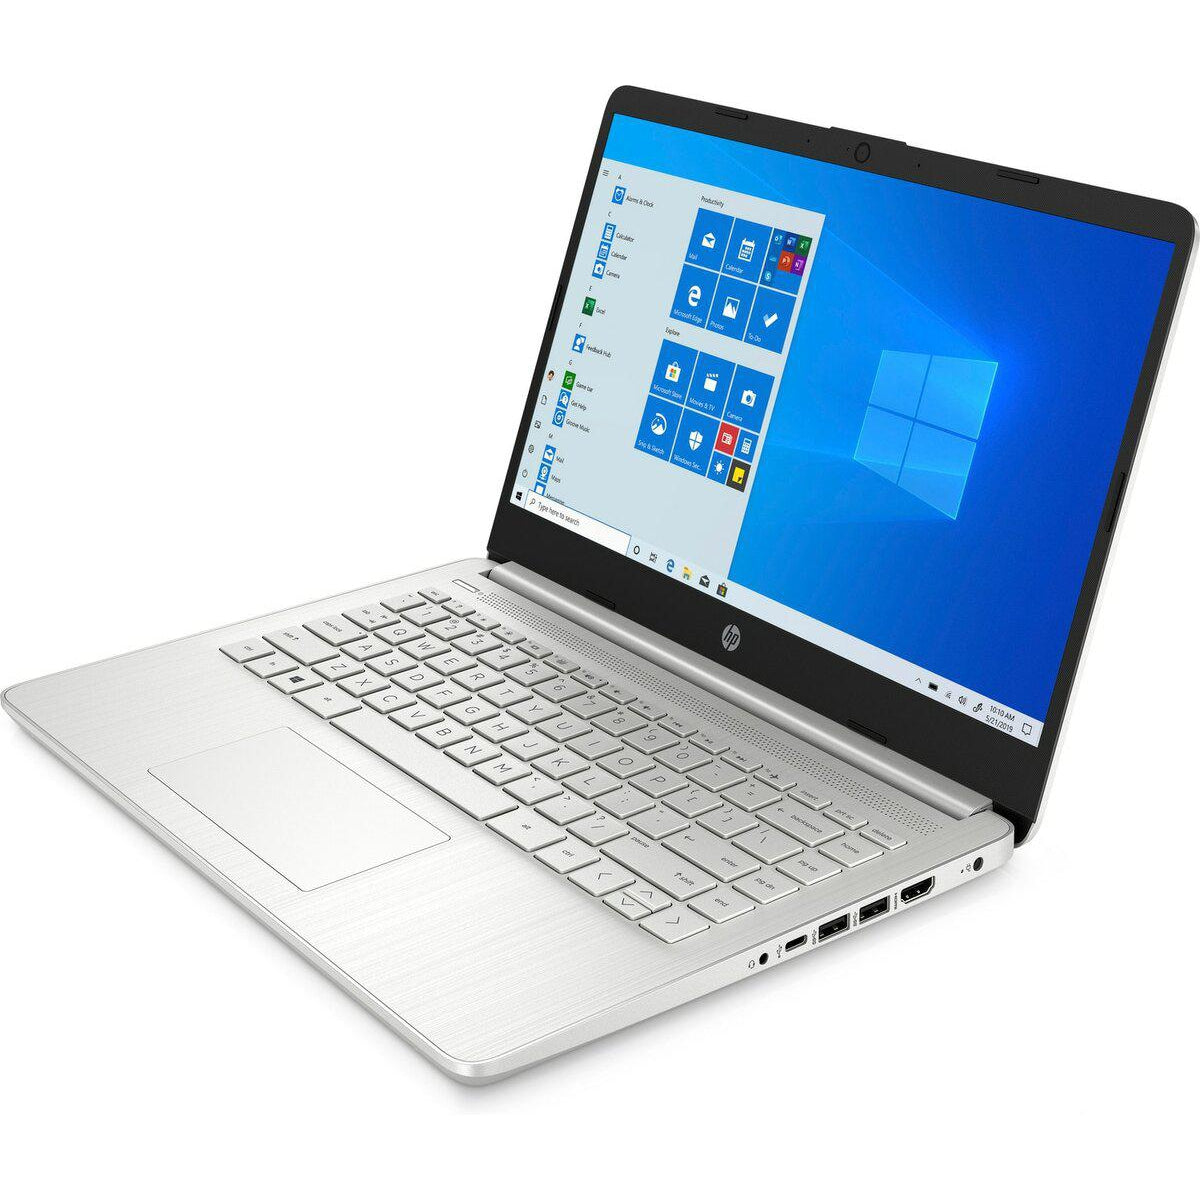 HP 14S-DQ1020NA 14" Laptop Intel Core i3 8GB RAM 128GB SSD - Silver - Refurbished Excellent